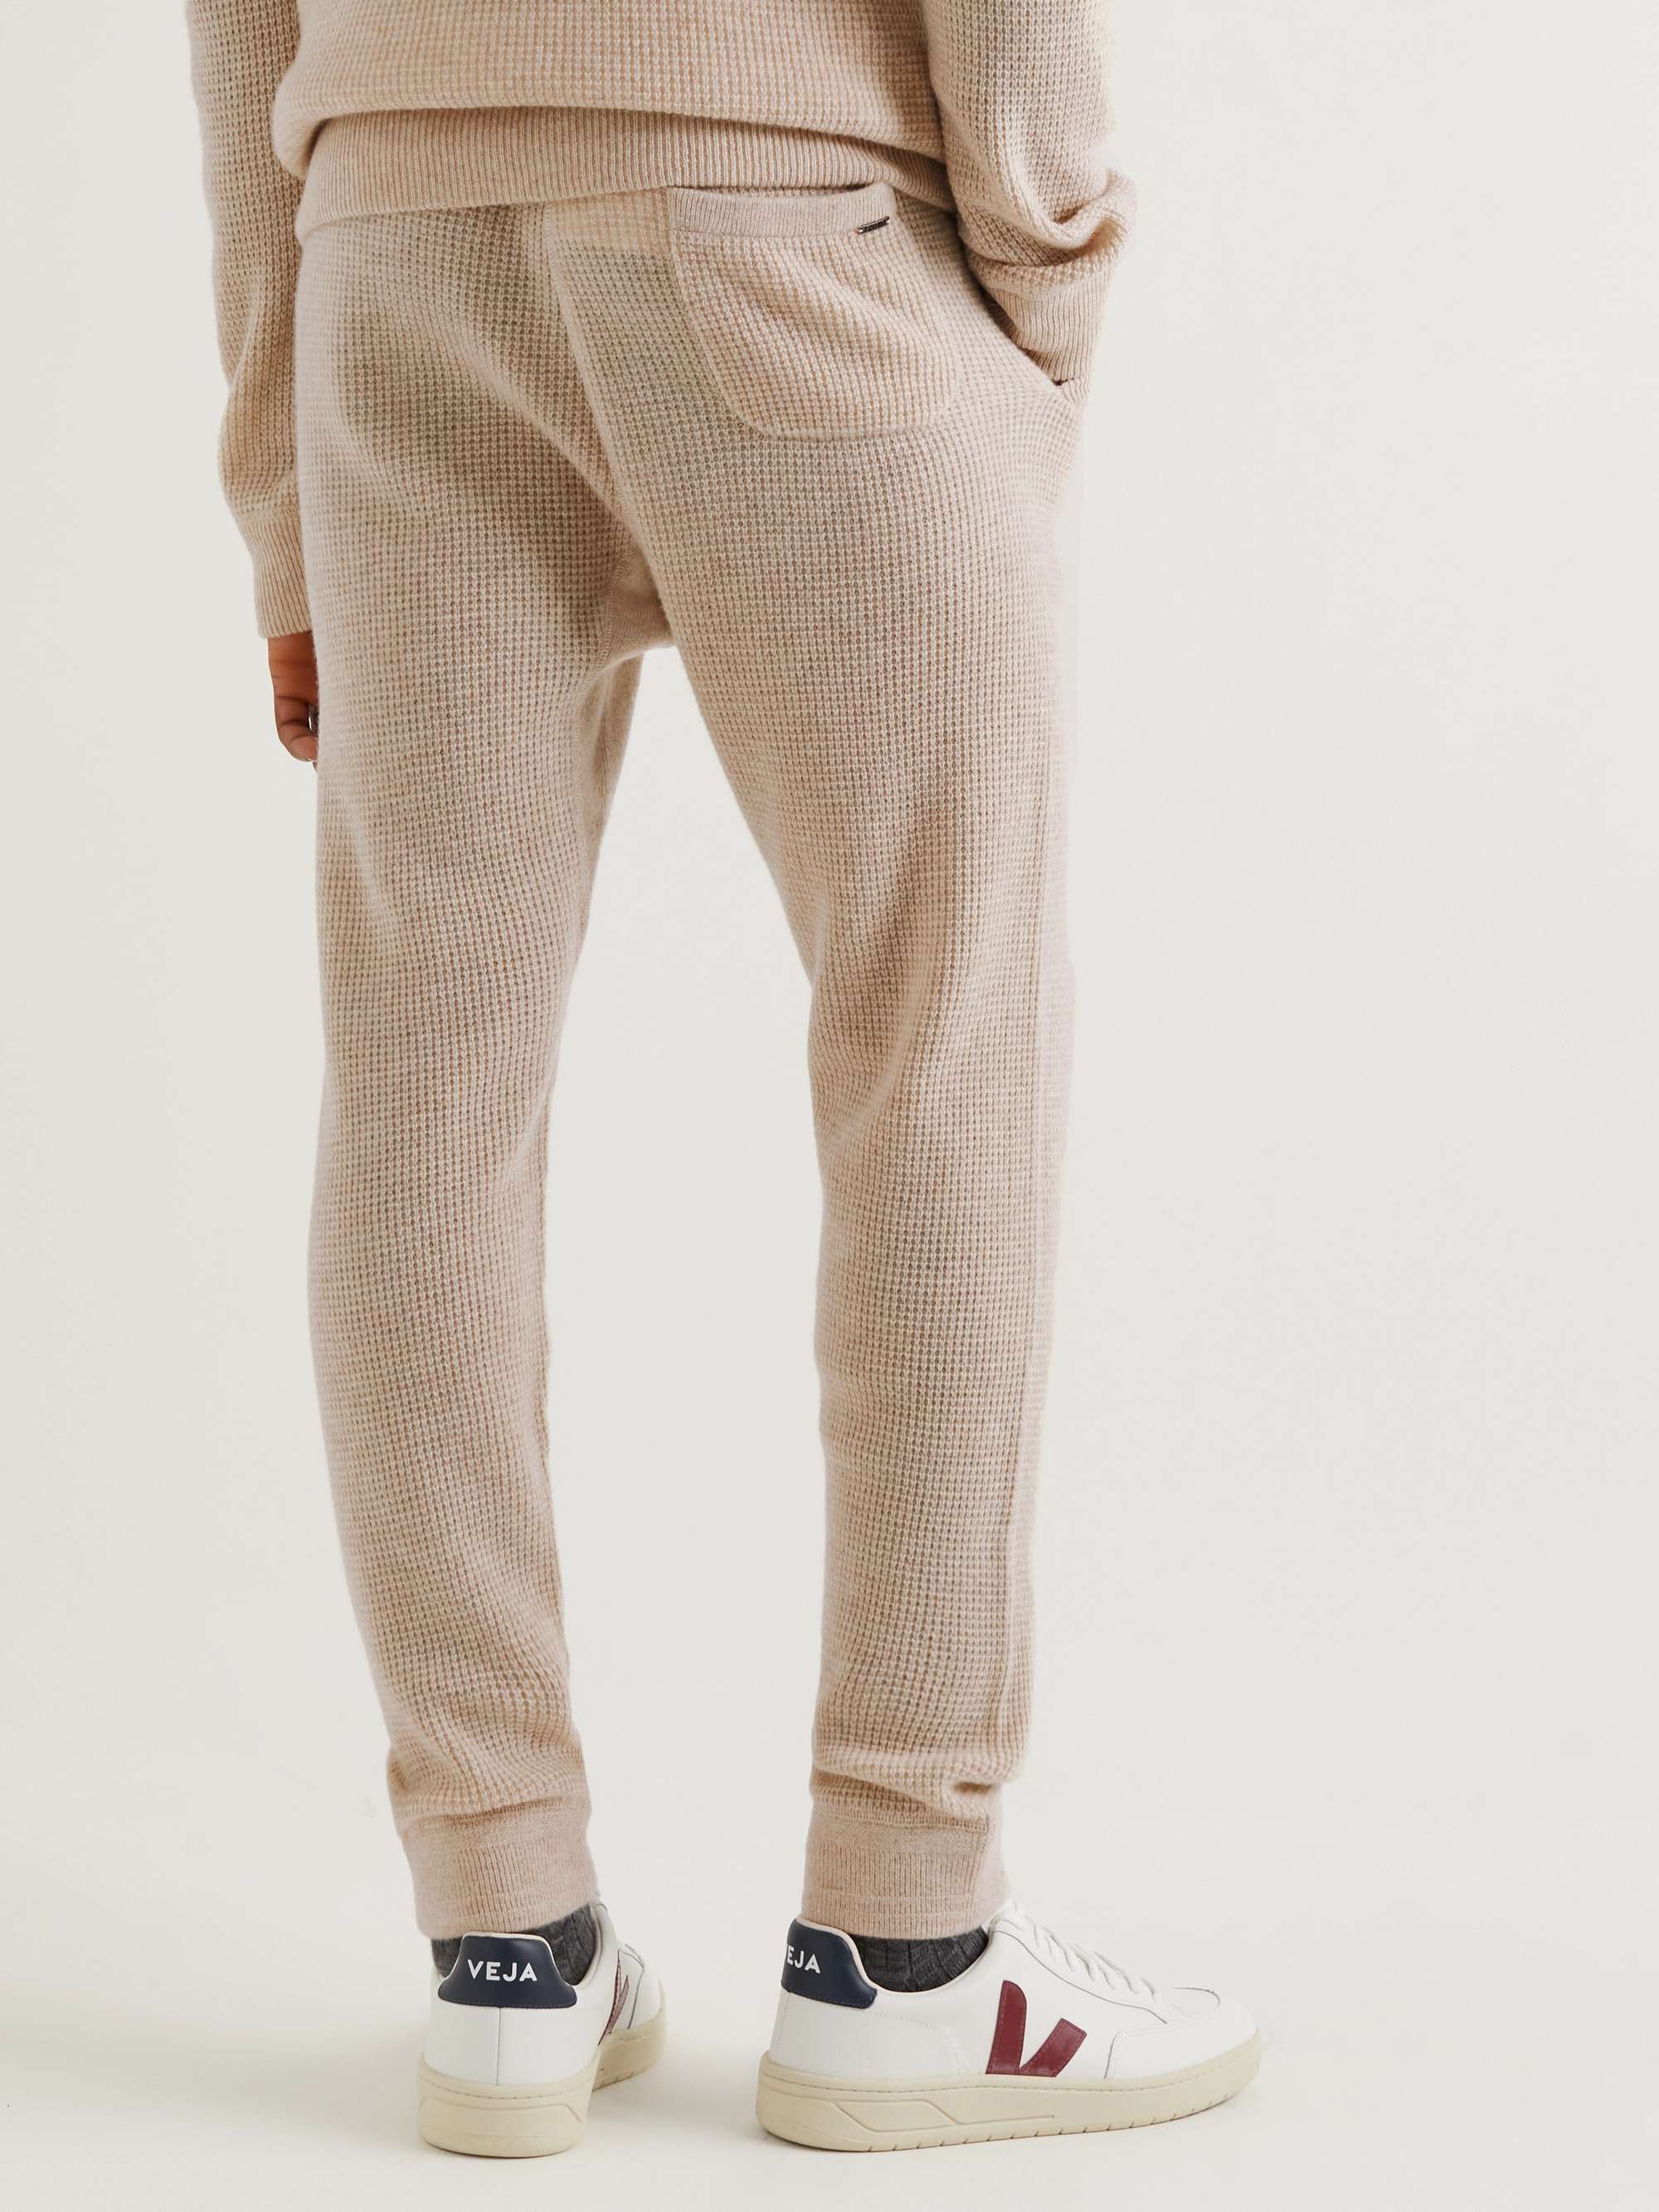 POLO RALPH LAUREN Tapered Waffle-Knit Cashmere Sweatpants